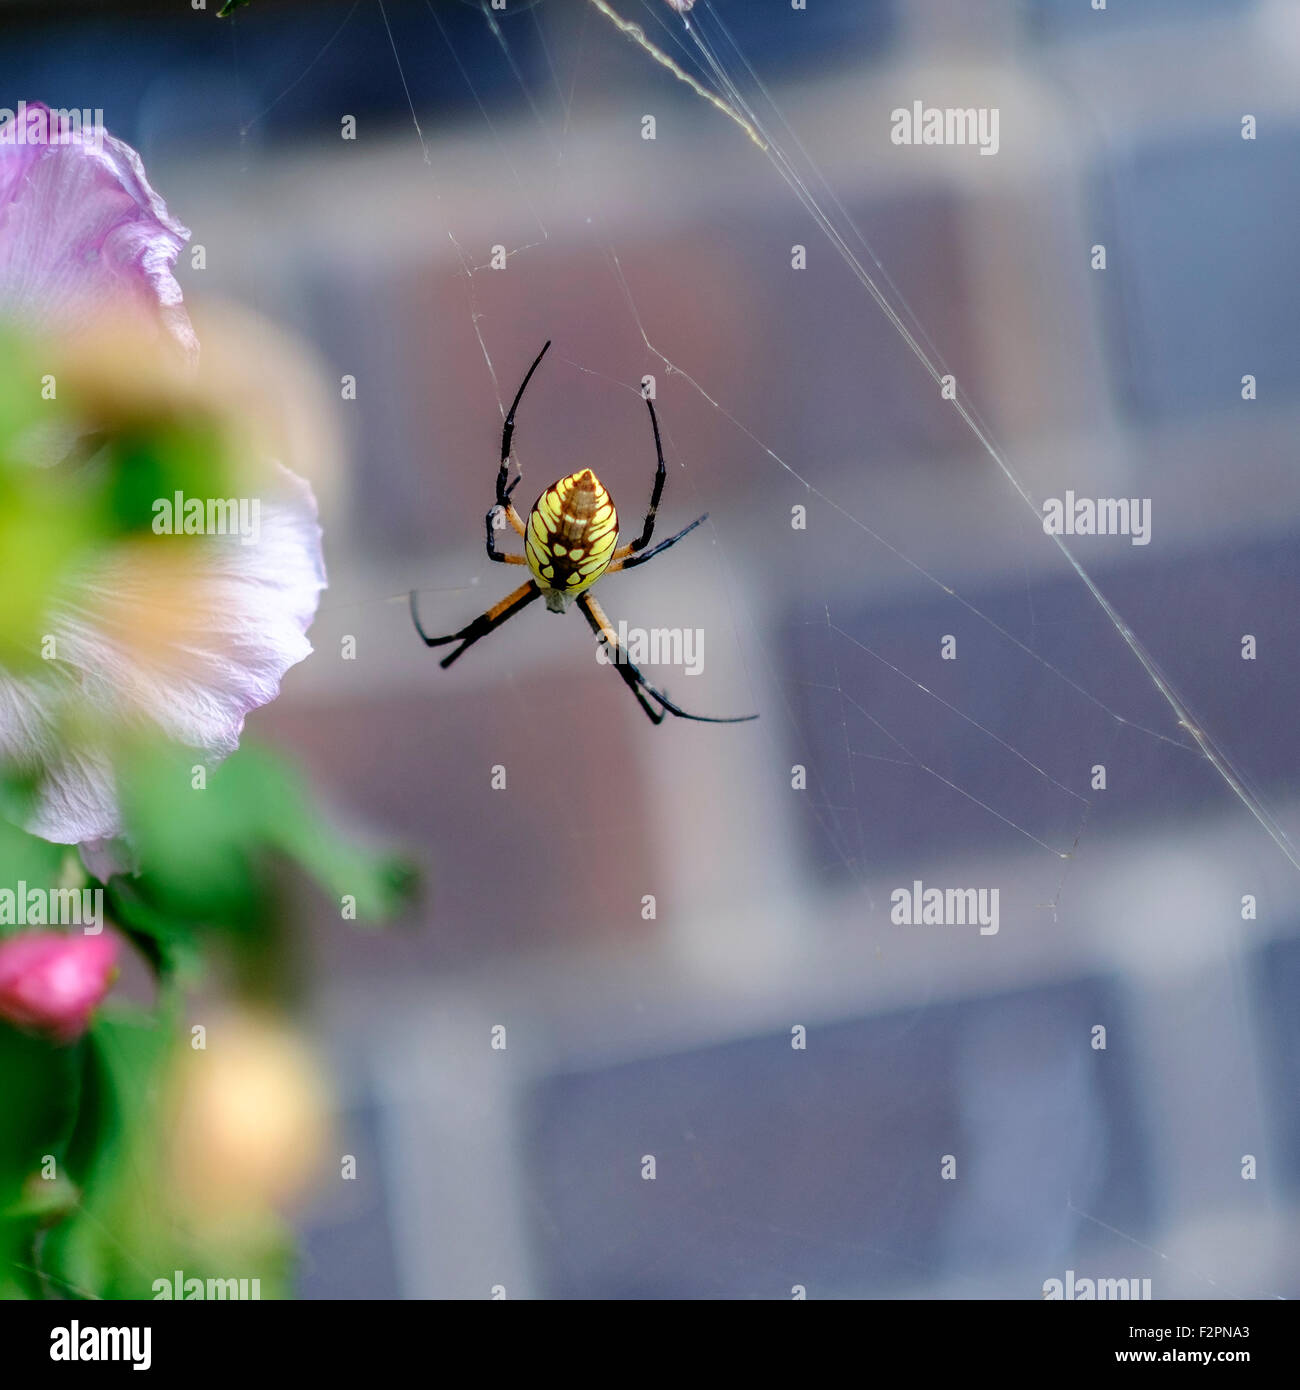 A yellow garden spider, or corn spider, Argiope aurantia,showing its back while on a rose of sharon shrub, Althea, in Oklahoma, USA. Stock Photo